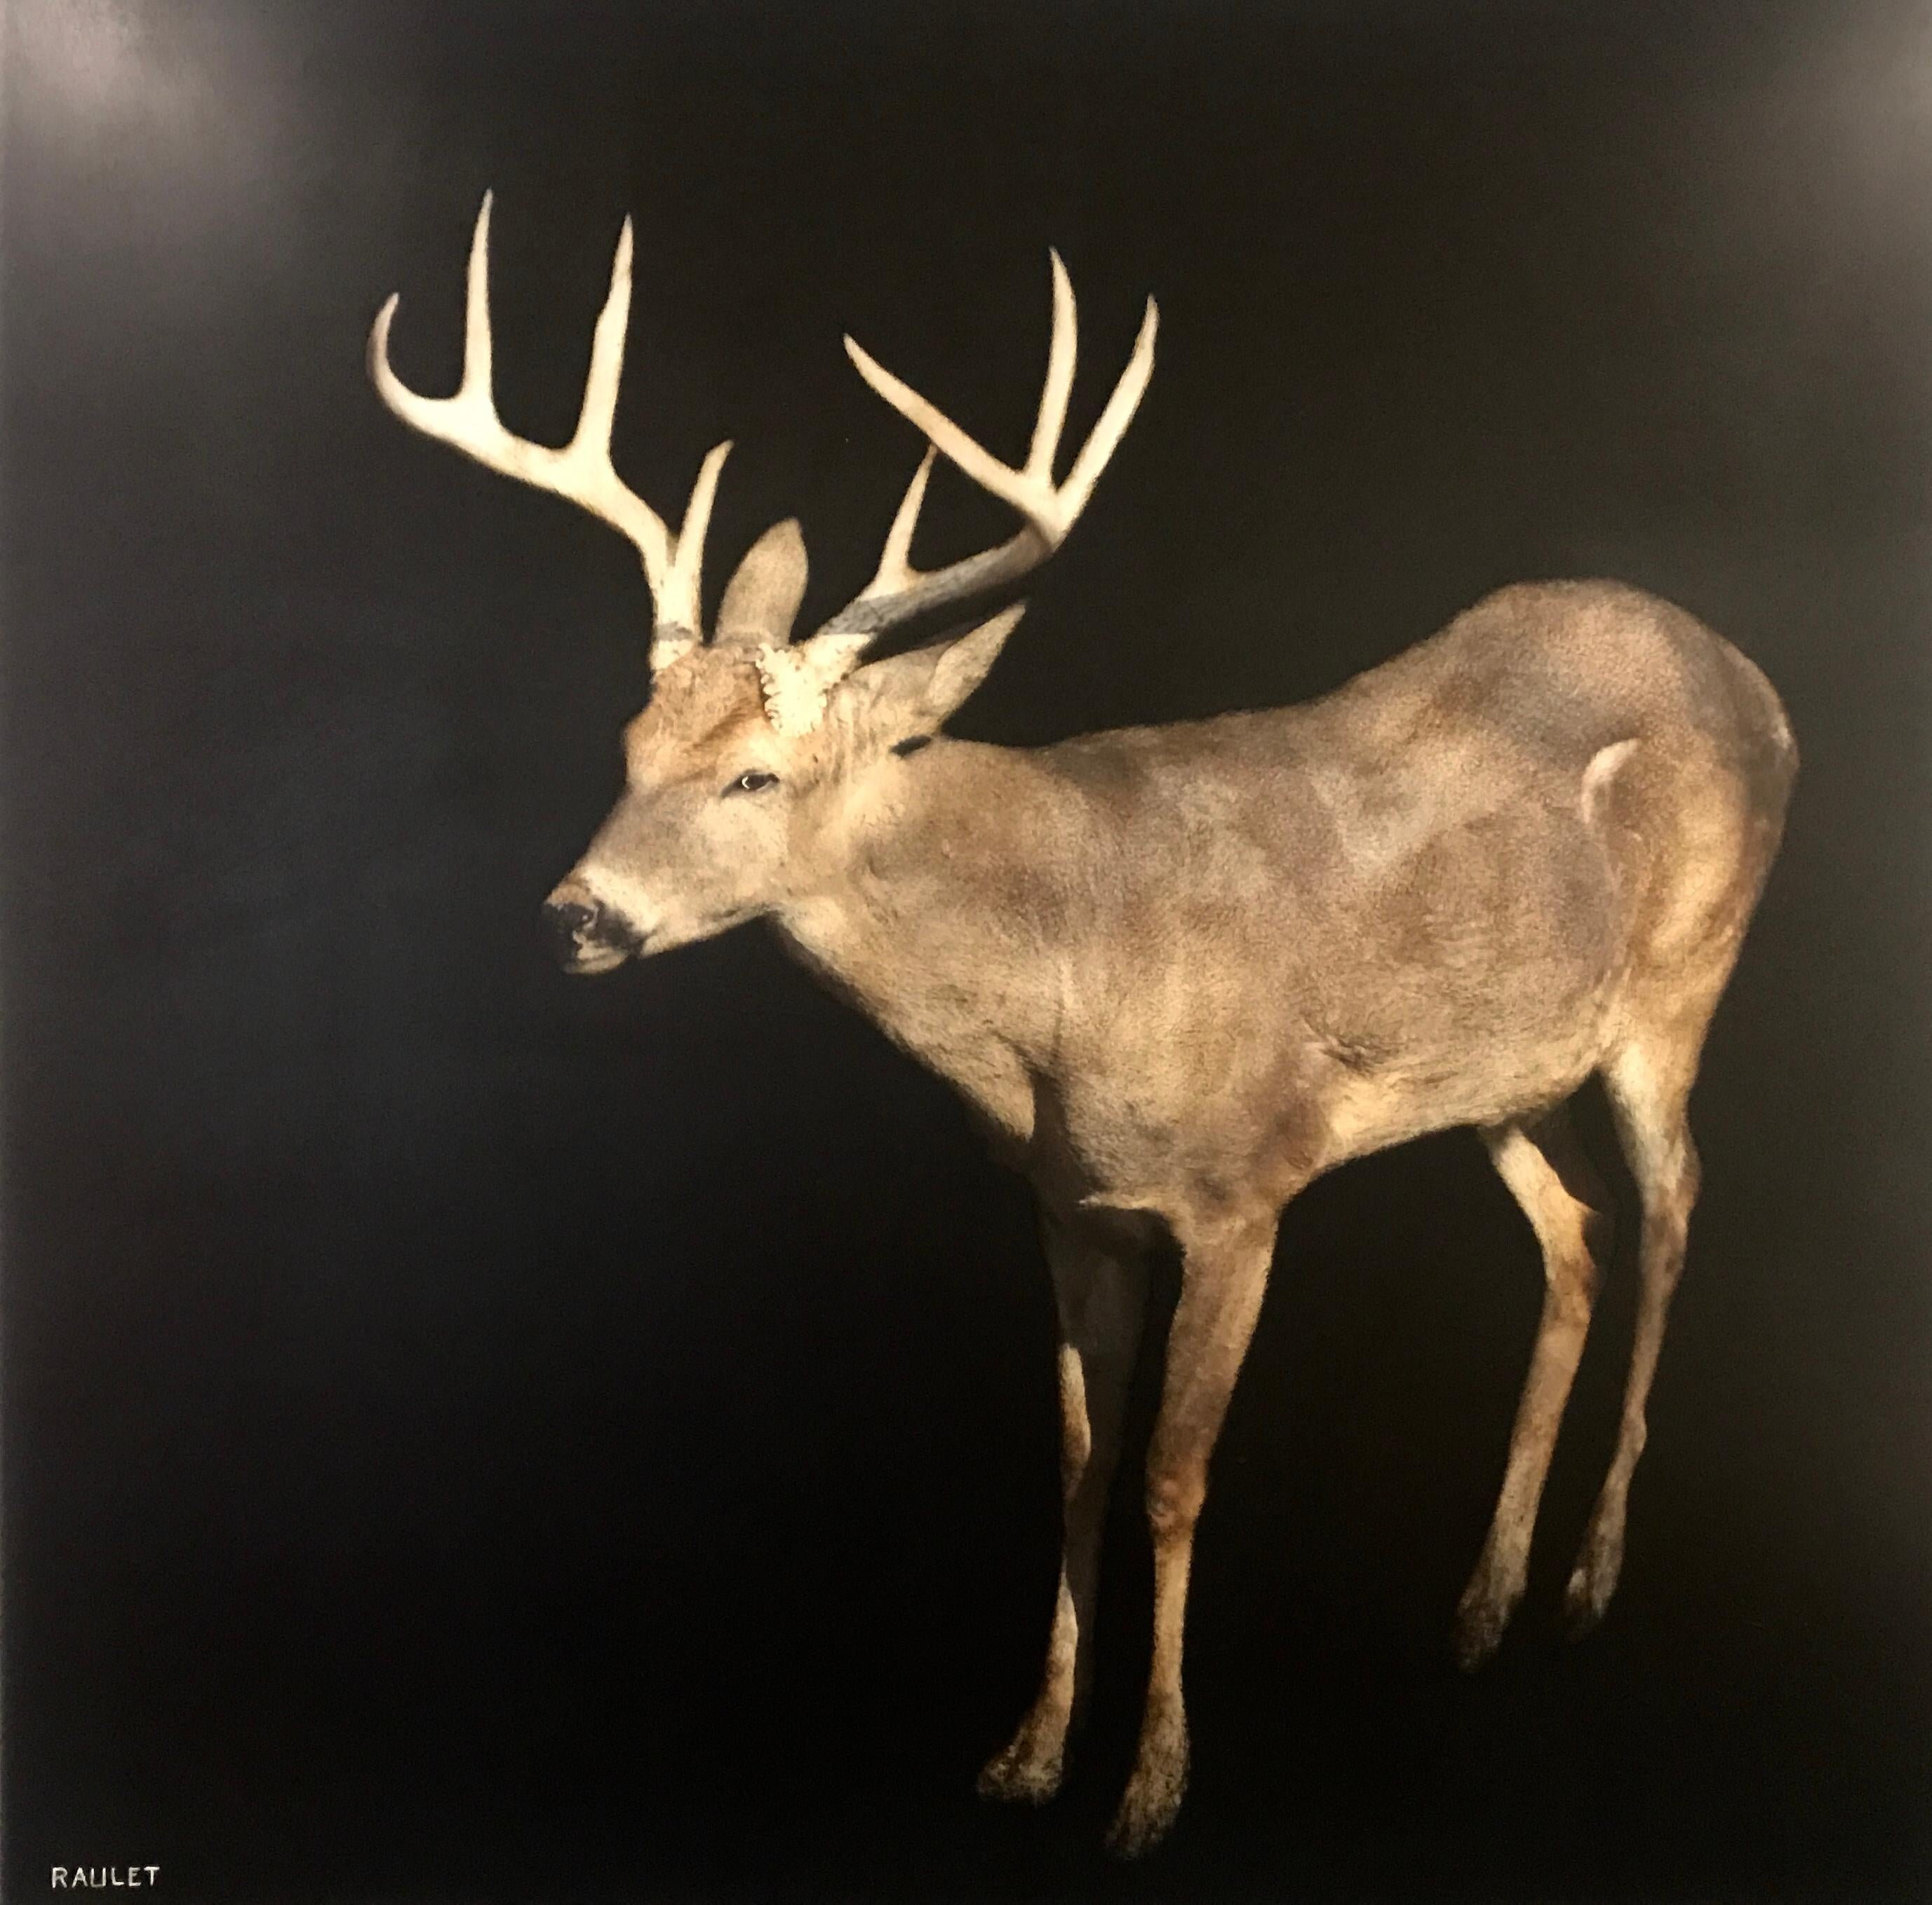 'Buck' is a large framed contemporary mixed media on board figurative painting created by American artist Dawne raulet in 2018. Painted on a dark background allowing our eye to embrace the scene beautifully, a majestic buck is seems to be moving